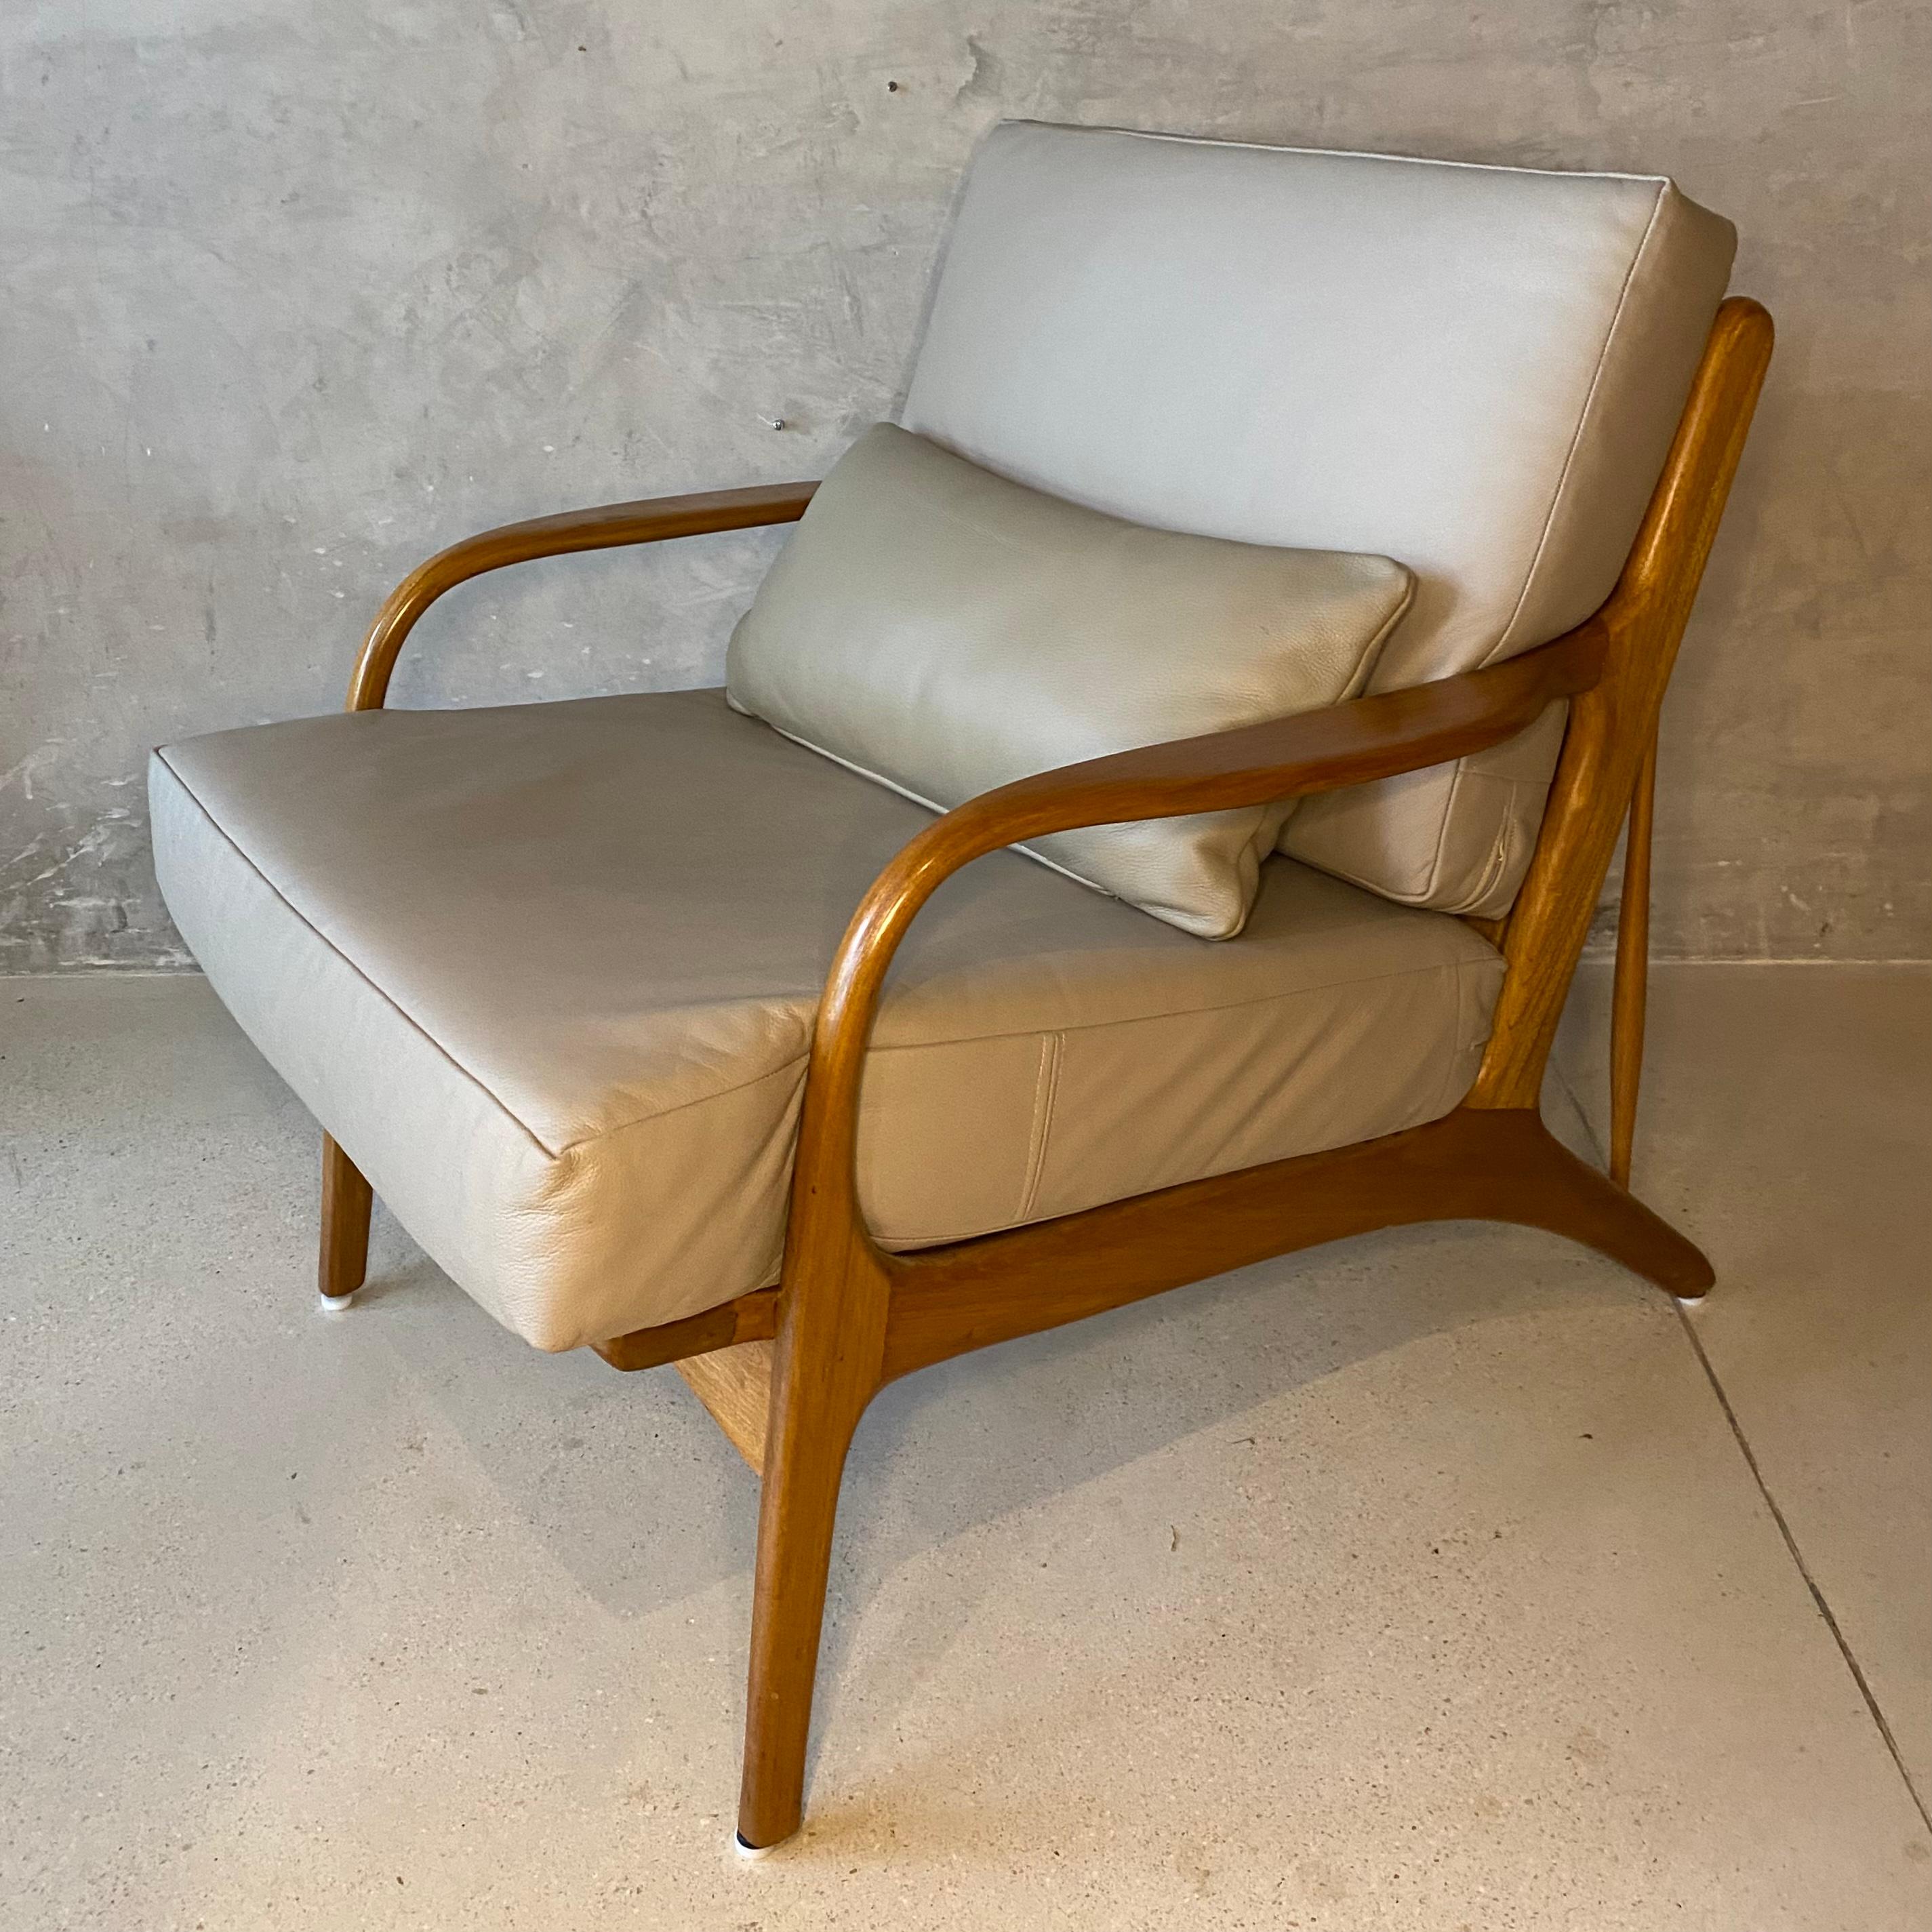 Mexican Midcentury Lounge Chair, “Malinche“, 1950s For Sale 4